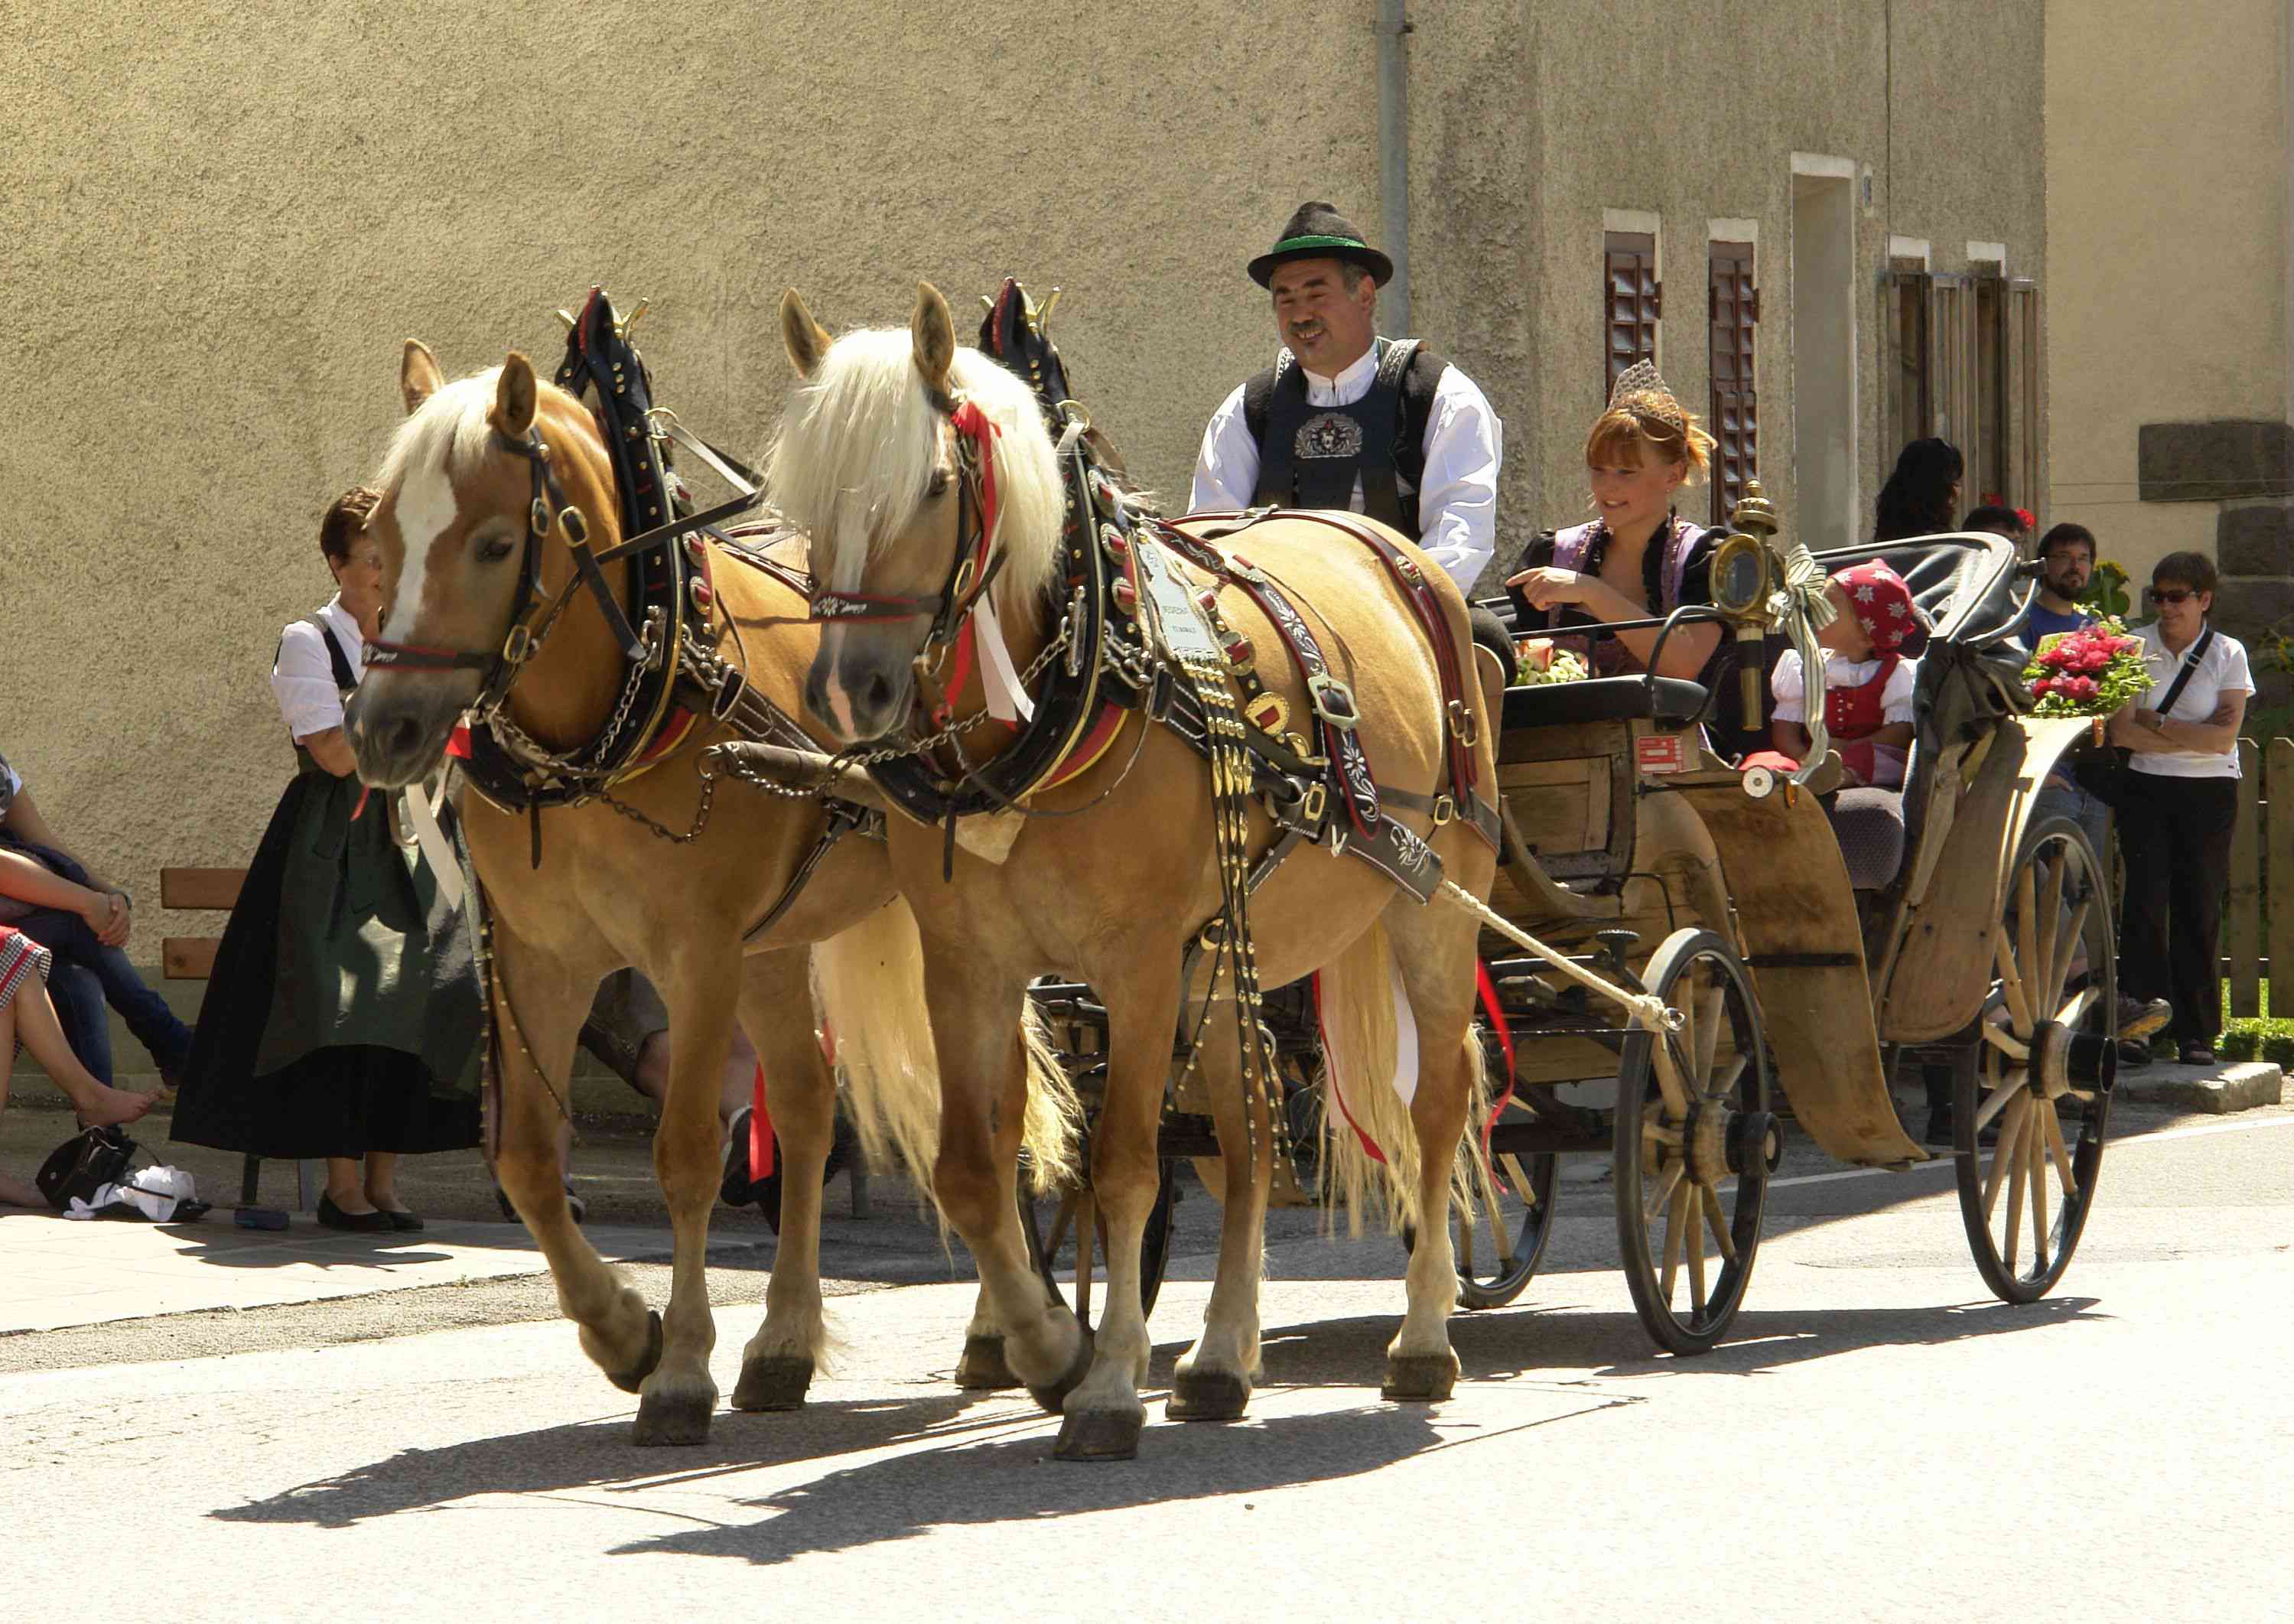 Pair of Haflingers pulling a carriage through town streets